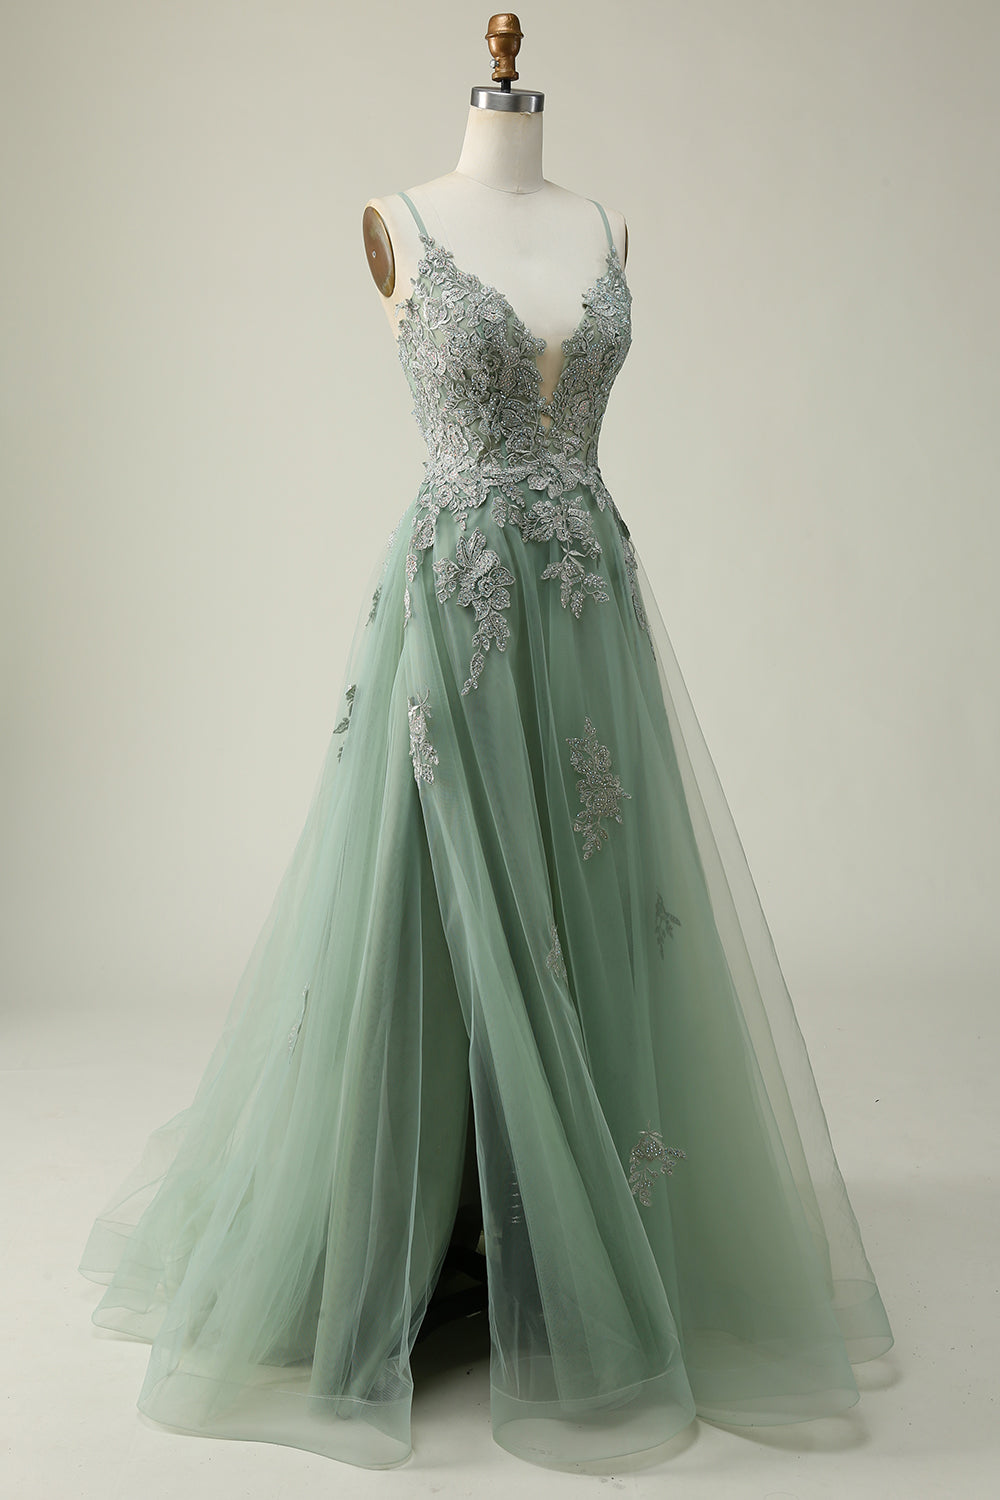 A Line Spaghetti Straps Green Long Corset Prom Dress with Criss Cross Back Gowns, Prom Dresses Stores